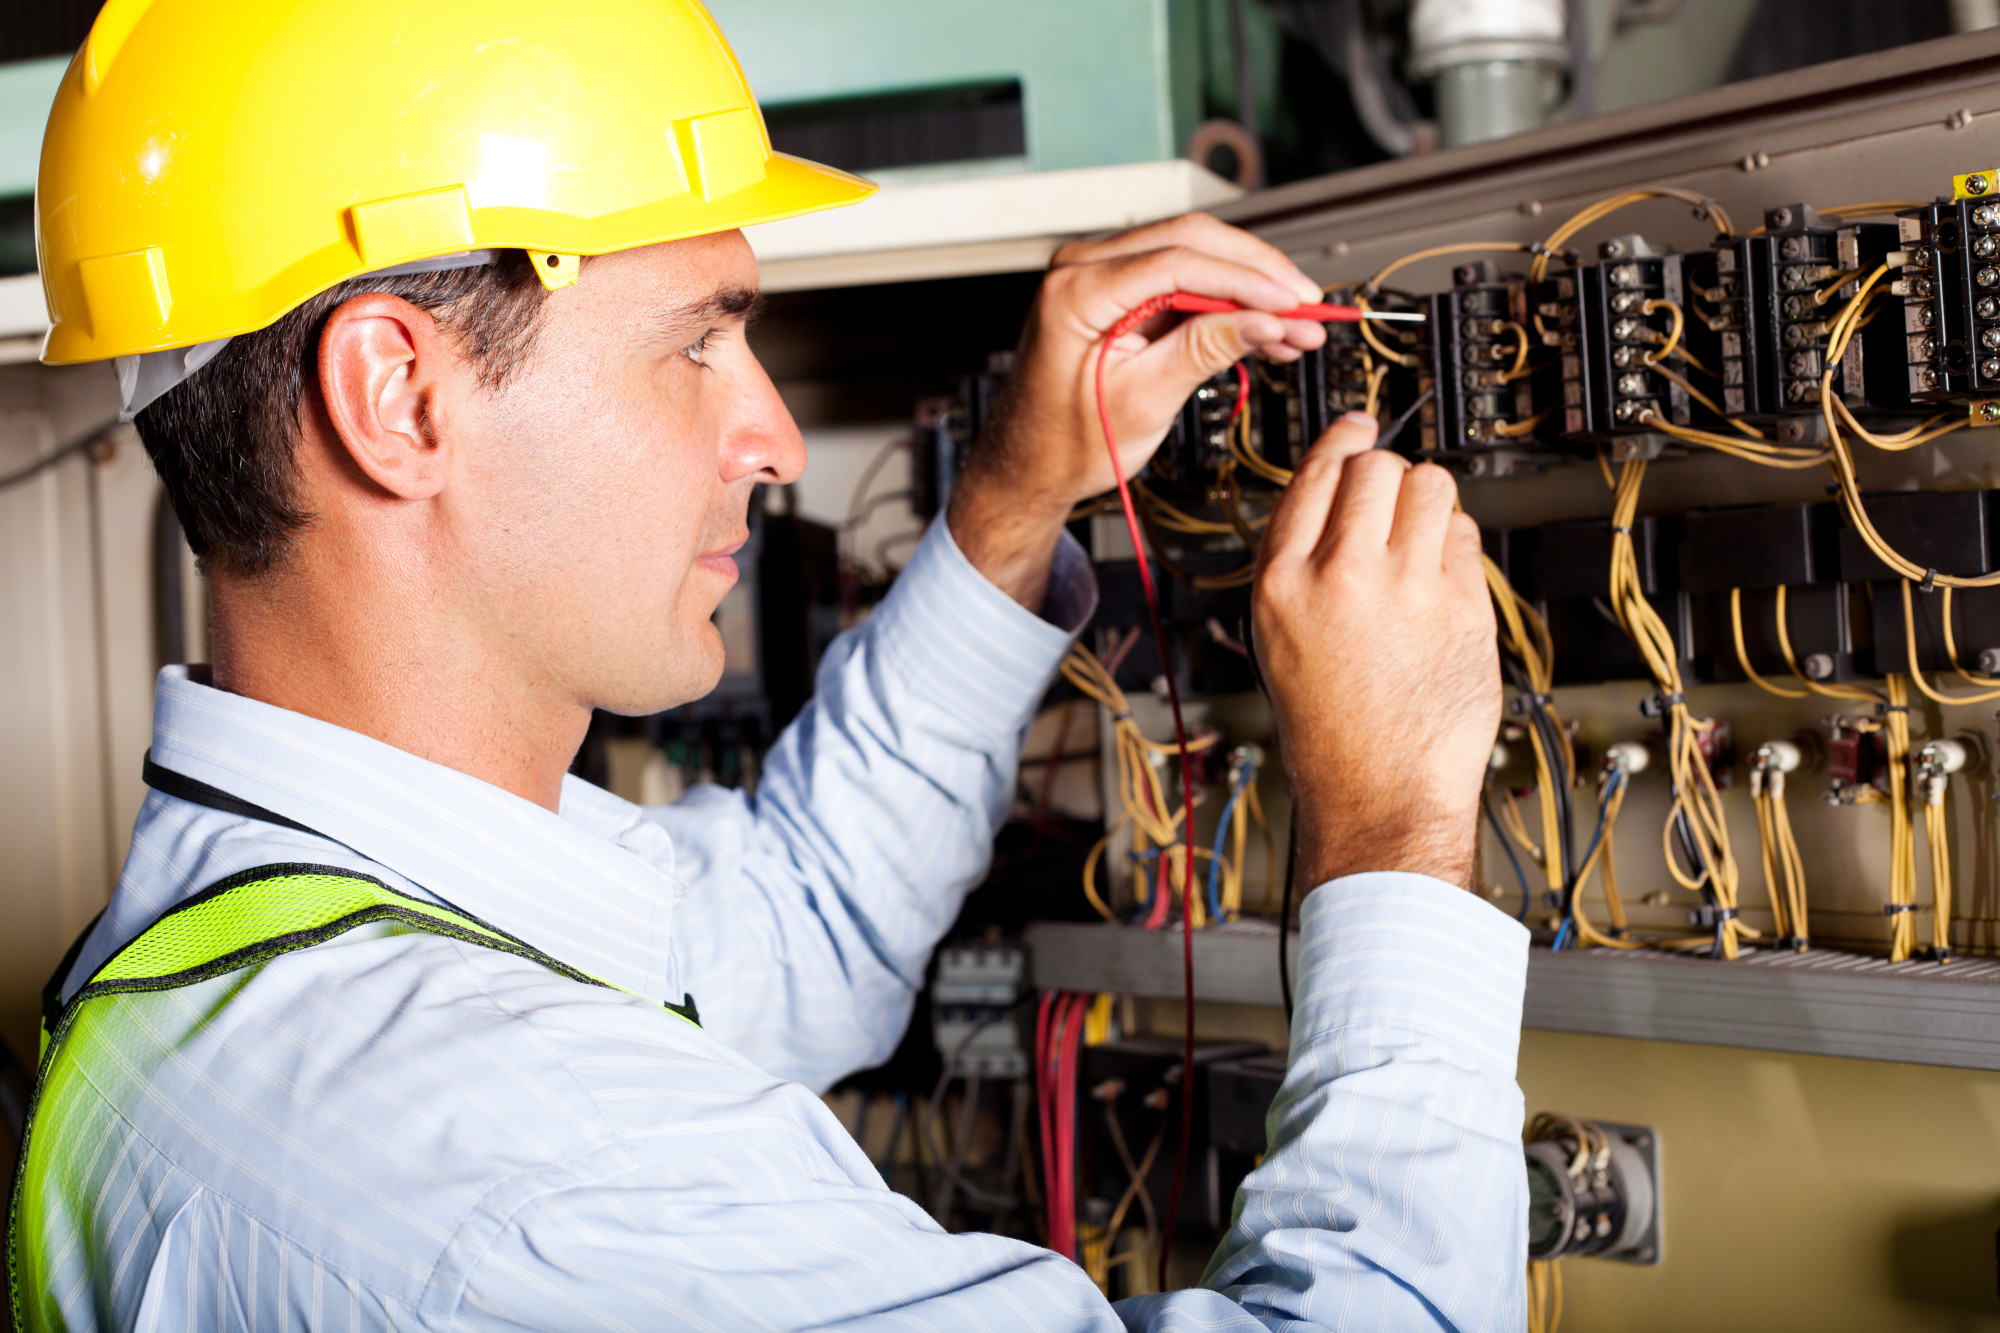 Finding the right expert to install or repair your electrical system requires knowing your options. Here is a guide about how to hire an electrical contractor.